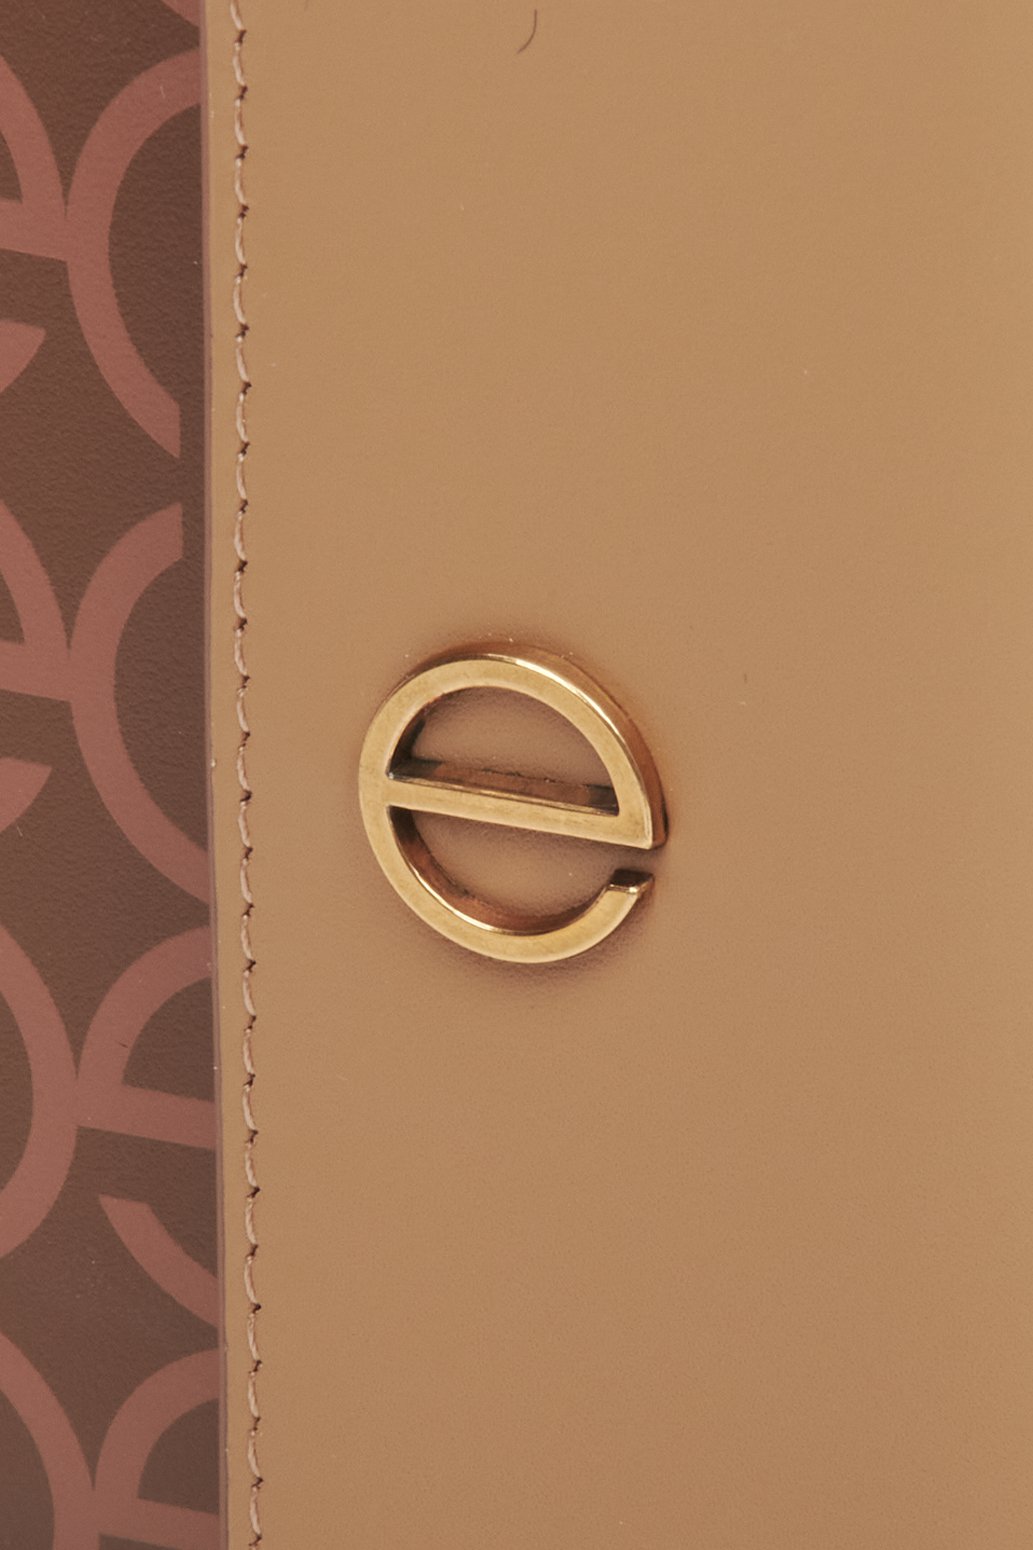 Women's leather tri-fold wallet with golden accents by Estro - close-up on the emblem.